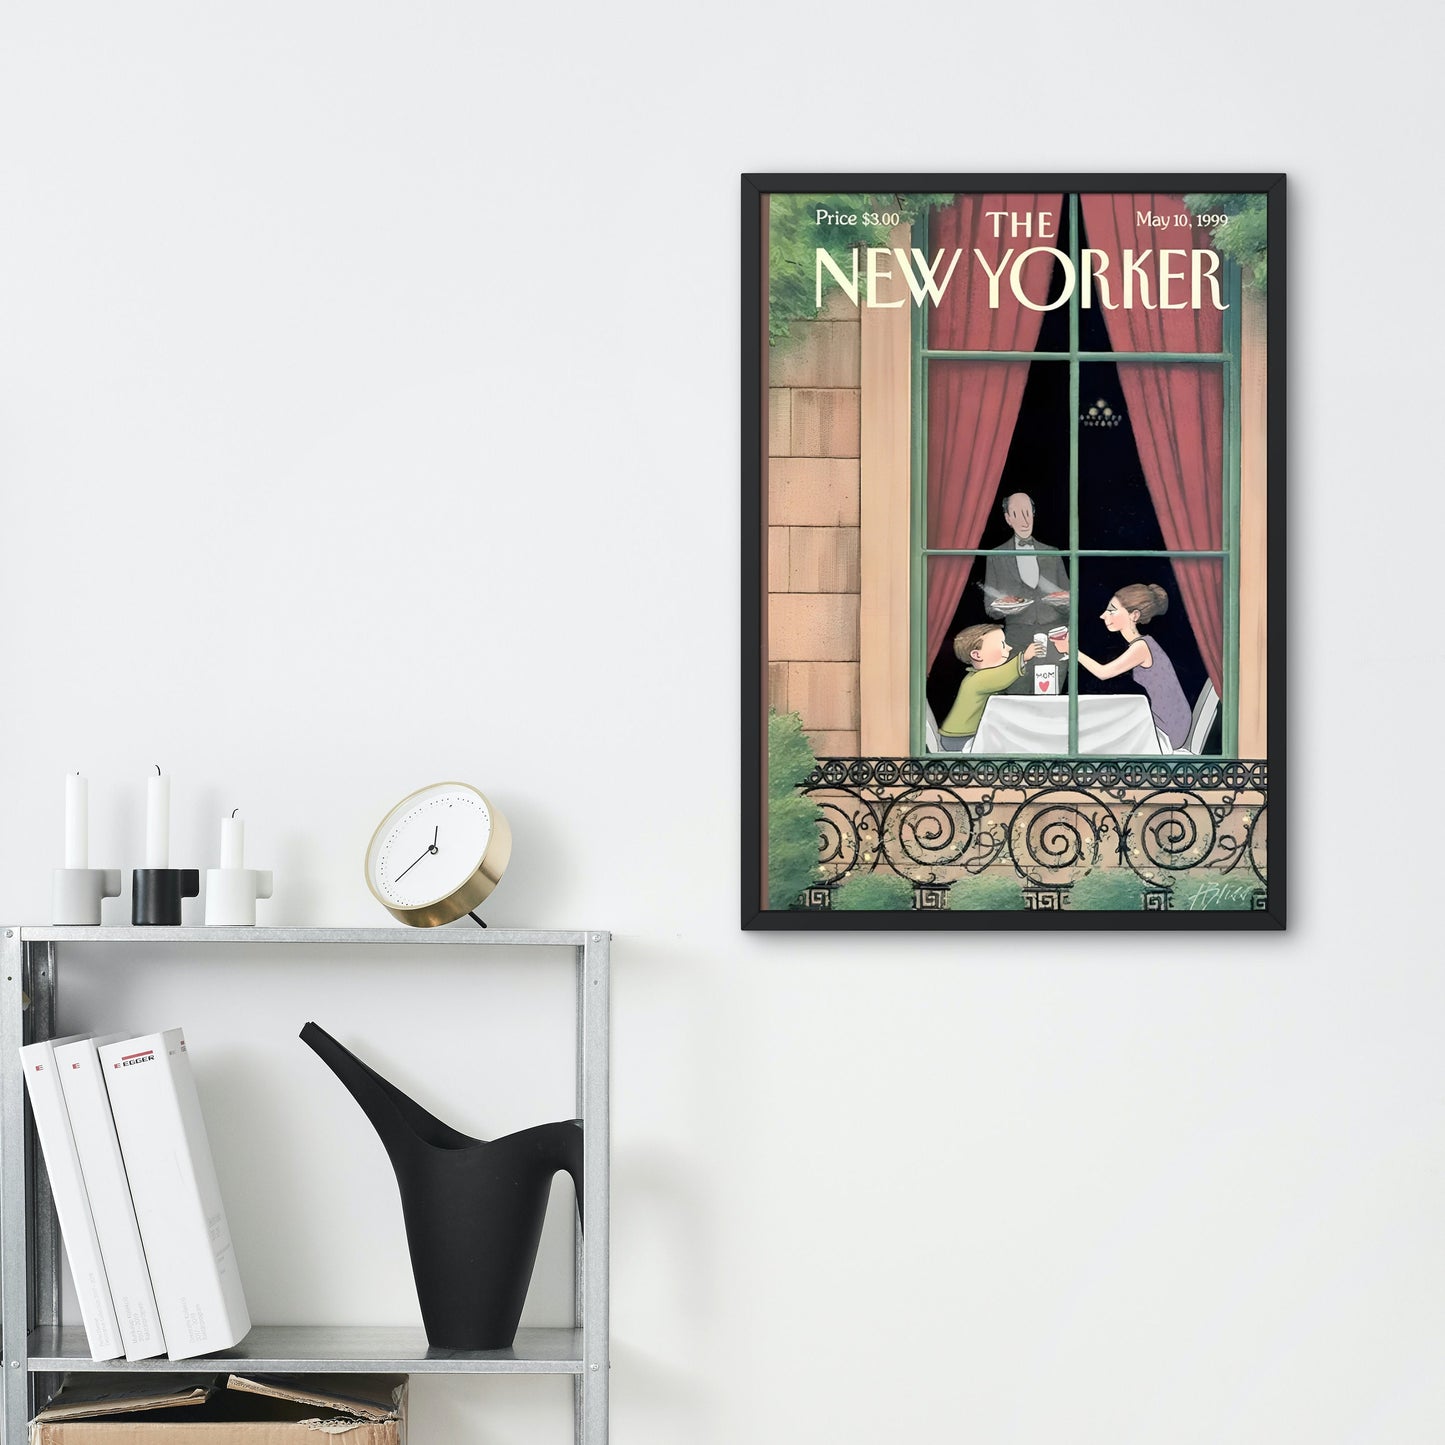 The New Yorker Vintage cover May 1999 edition PRINTABLE, Vintage Art, The New Yorker Retro Magazine Print, Trendy Magazine Art, Mother's day